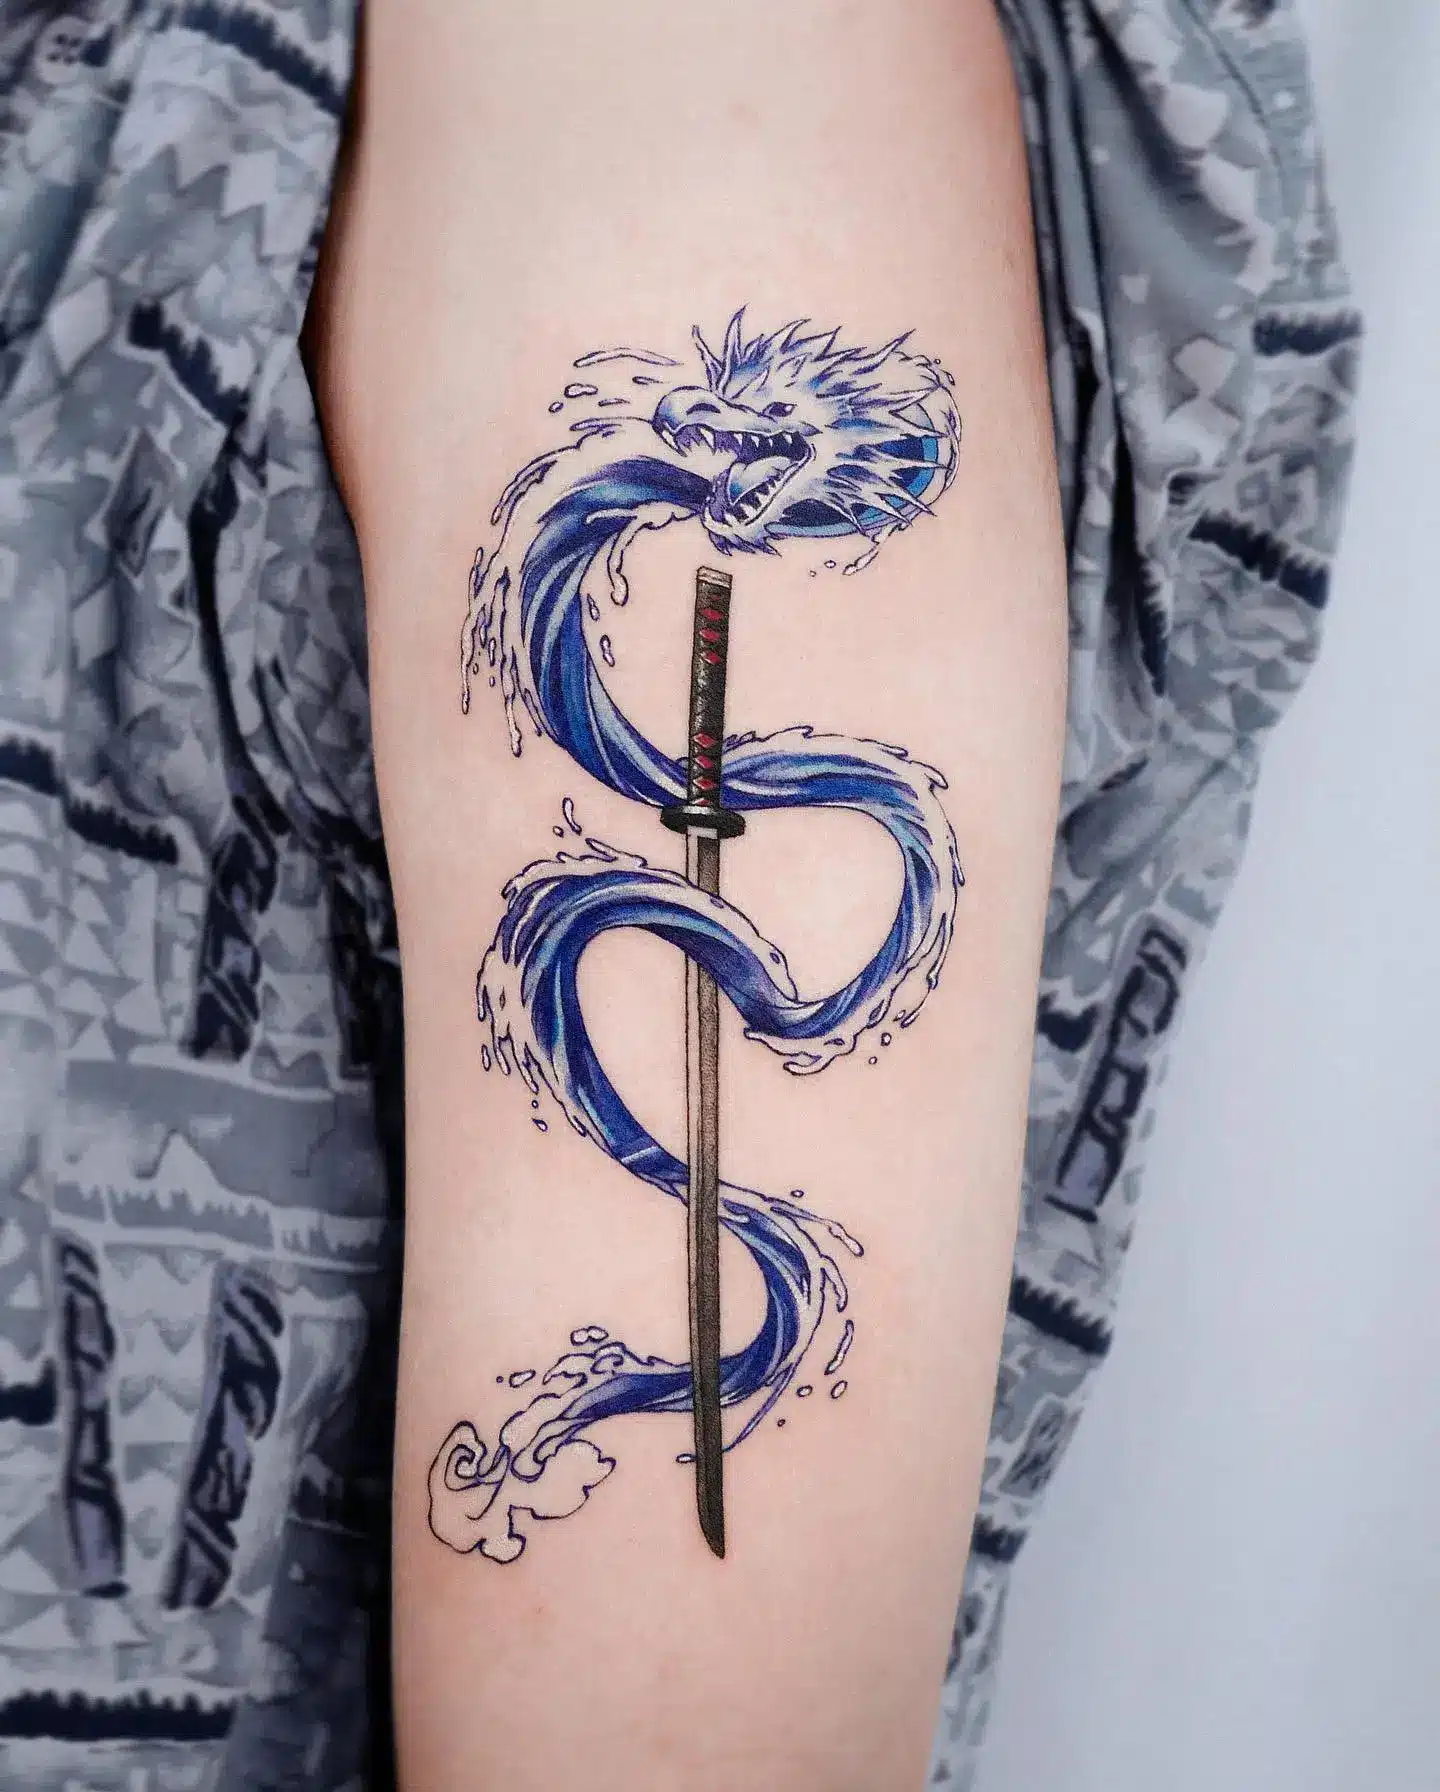 Water Dragon with a Sword Tattoo